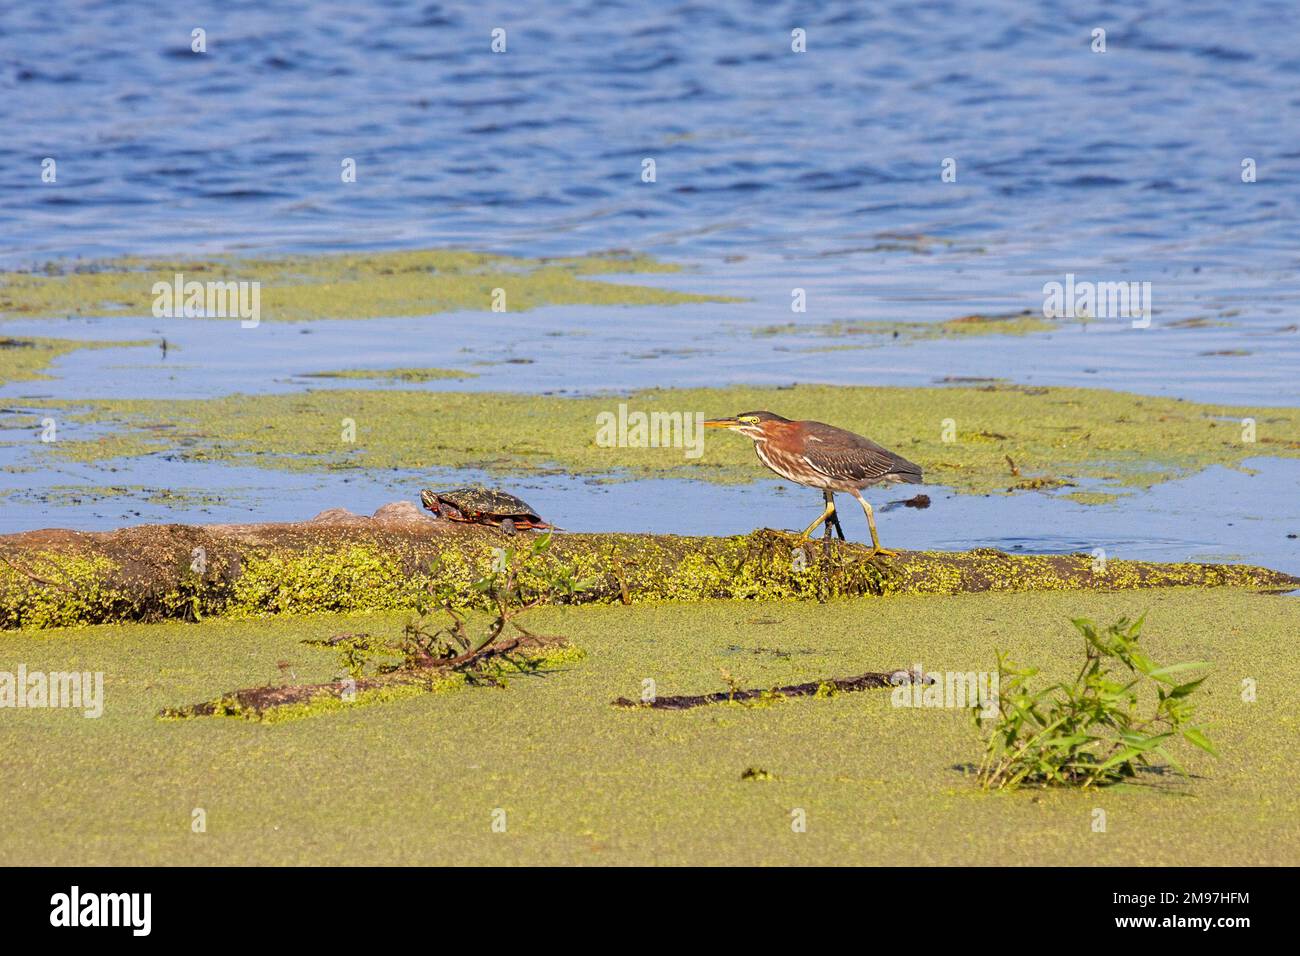 A green heron chases a painted turtle on top of a log in a pond full of duckweed Stock Photo